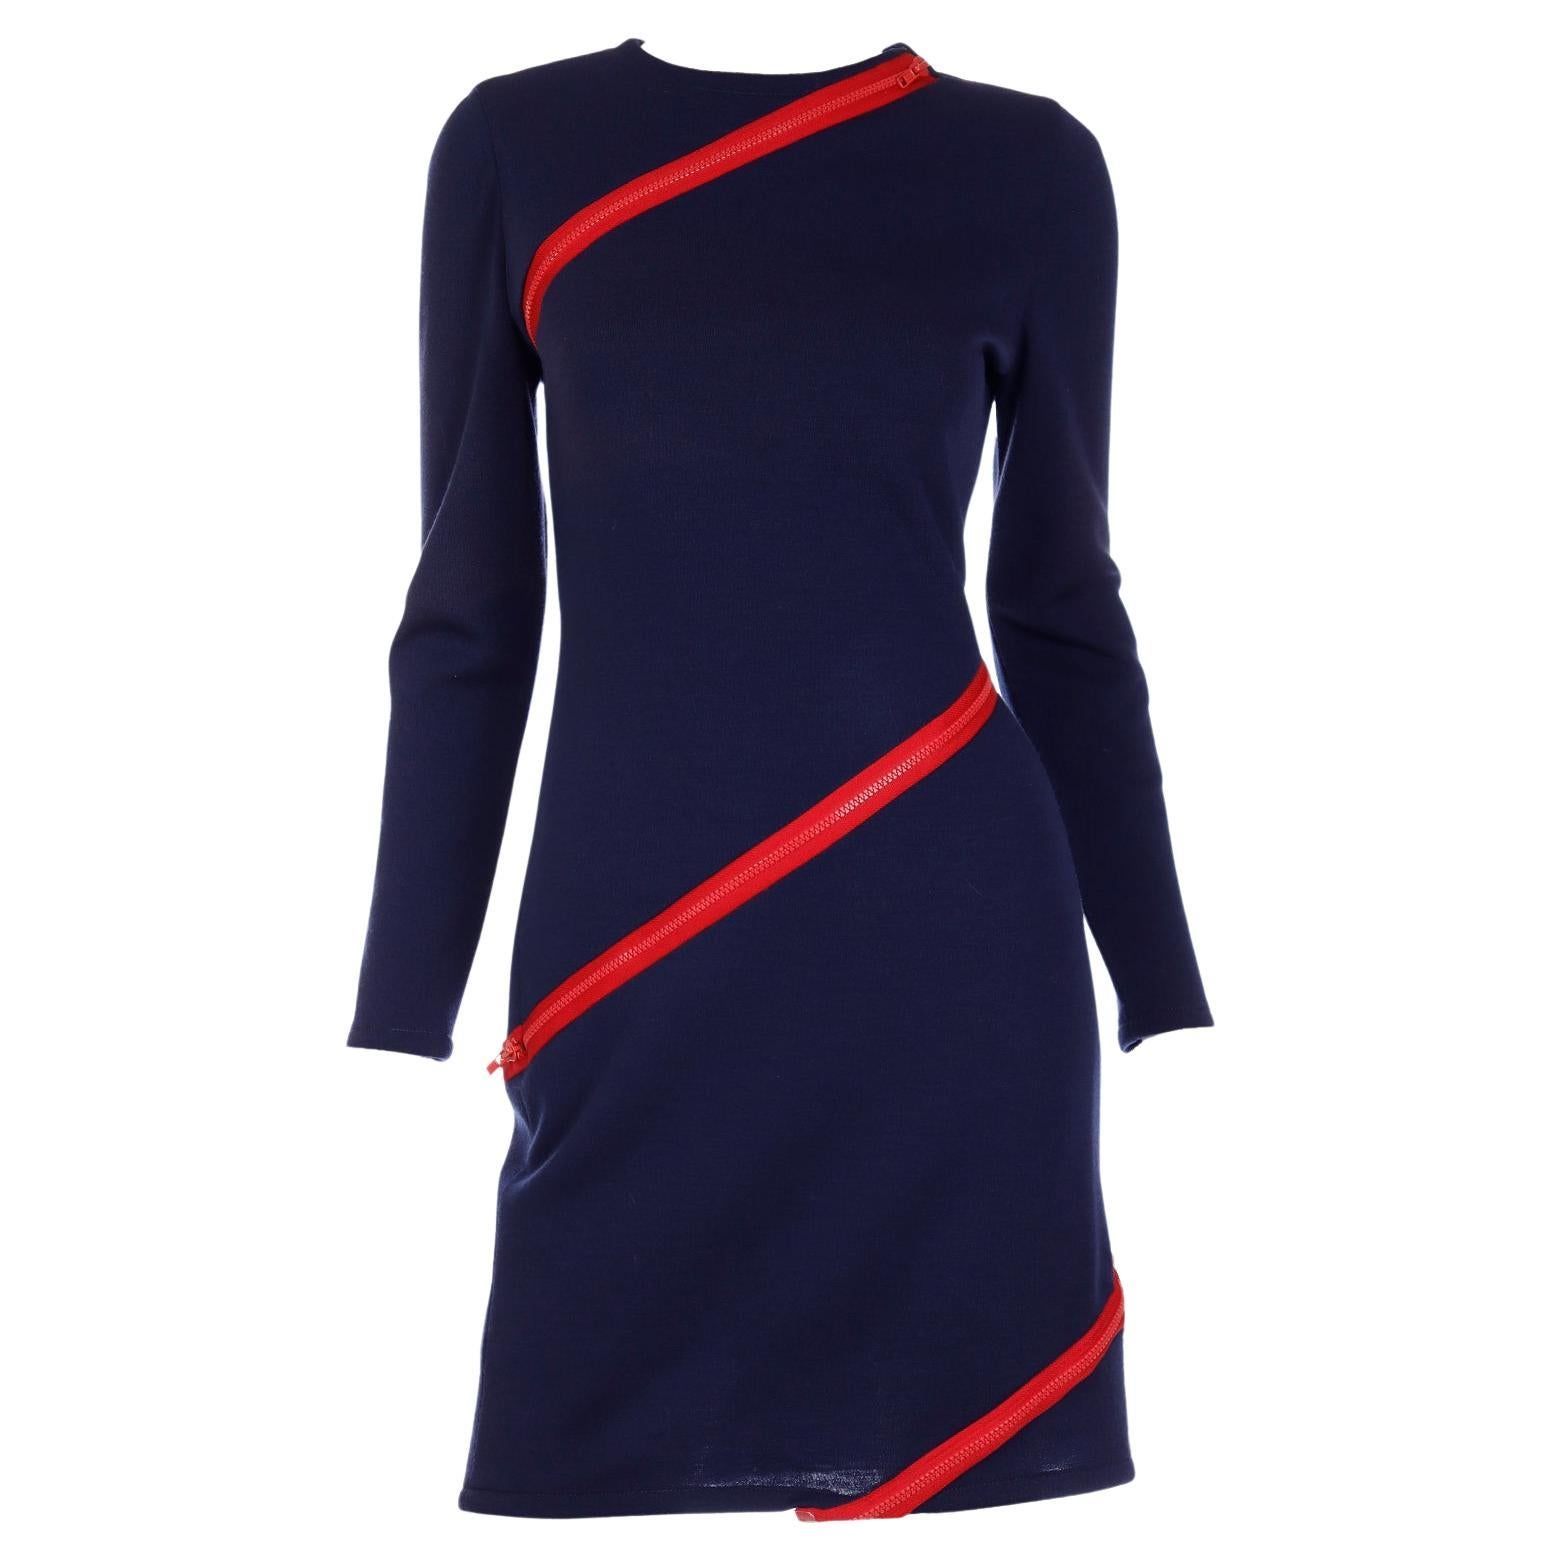 Vintage Bill Blass Navy Blue Knit Dress With Functional Red Zippers For Sale